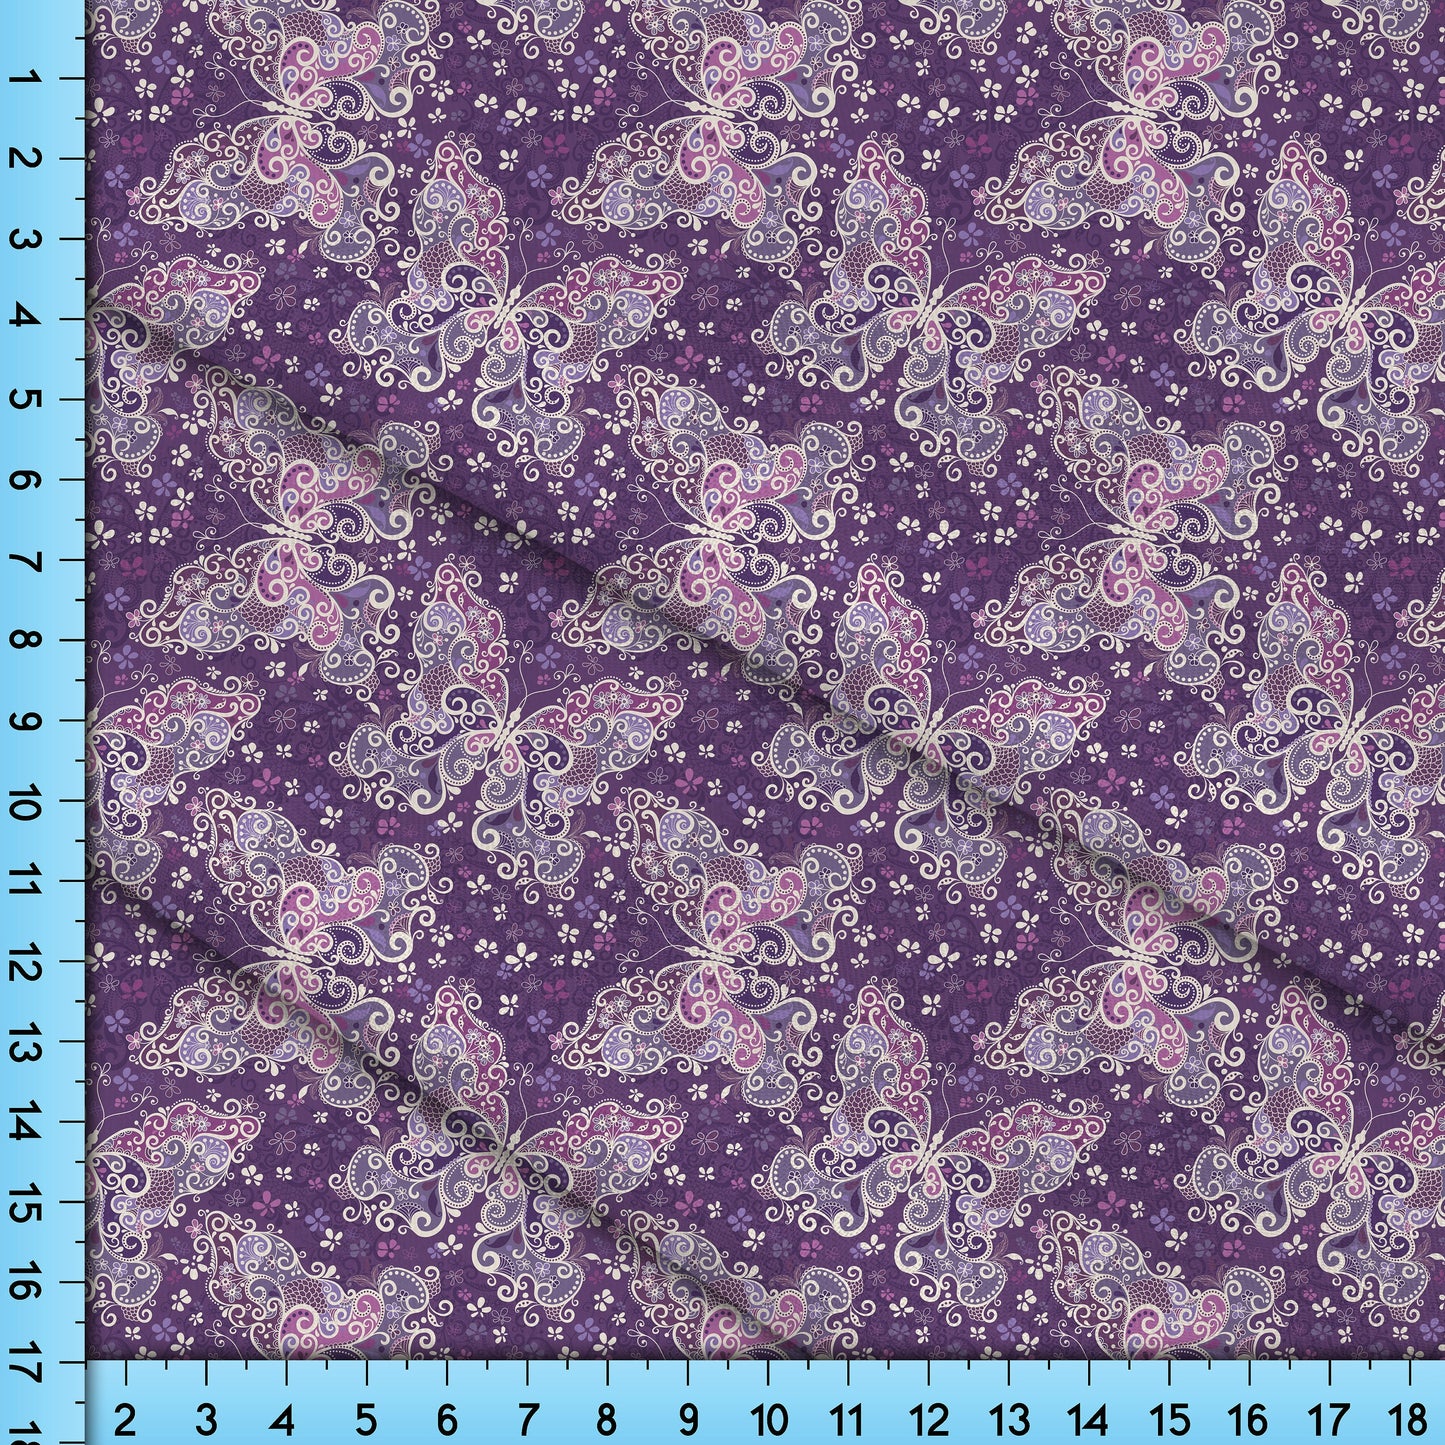 Purple Butterfly Fabric Cottagecore Design for Crafts, Upholstery, Clothing